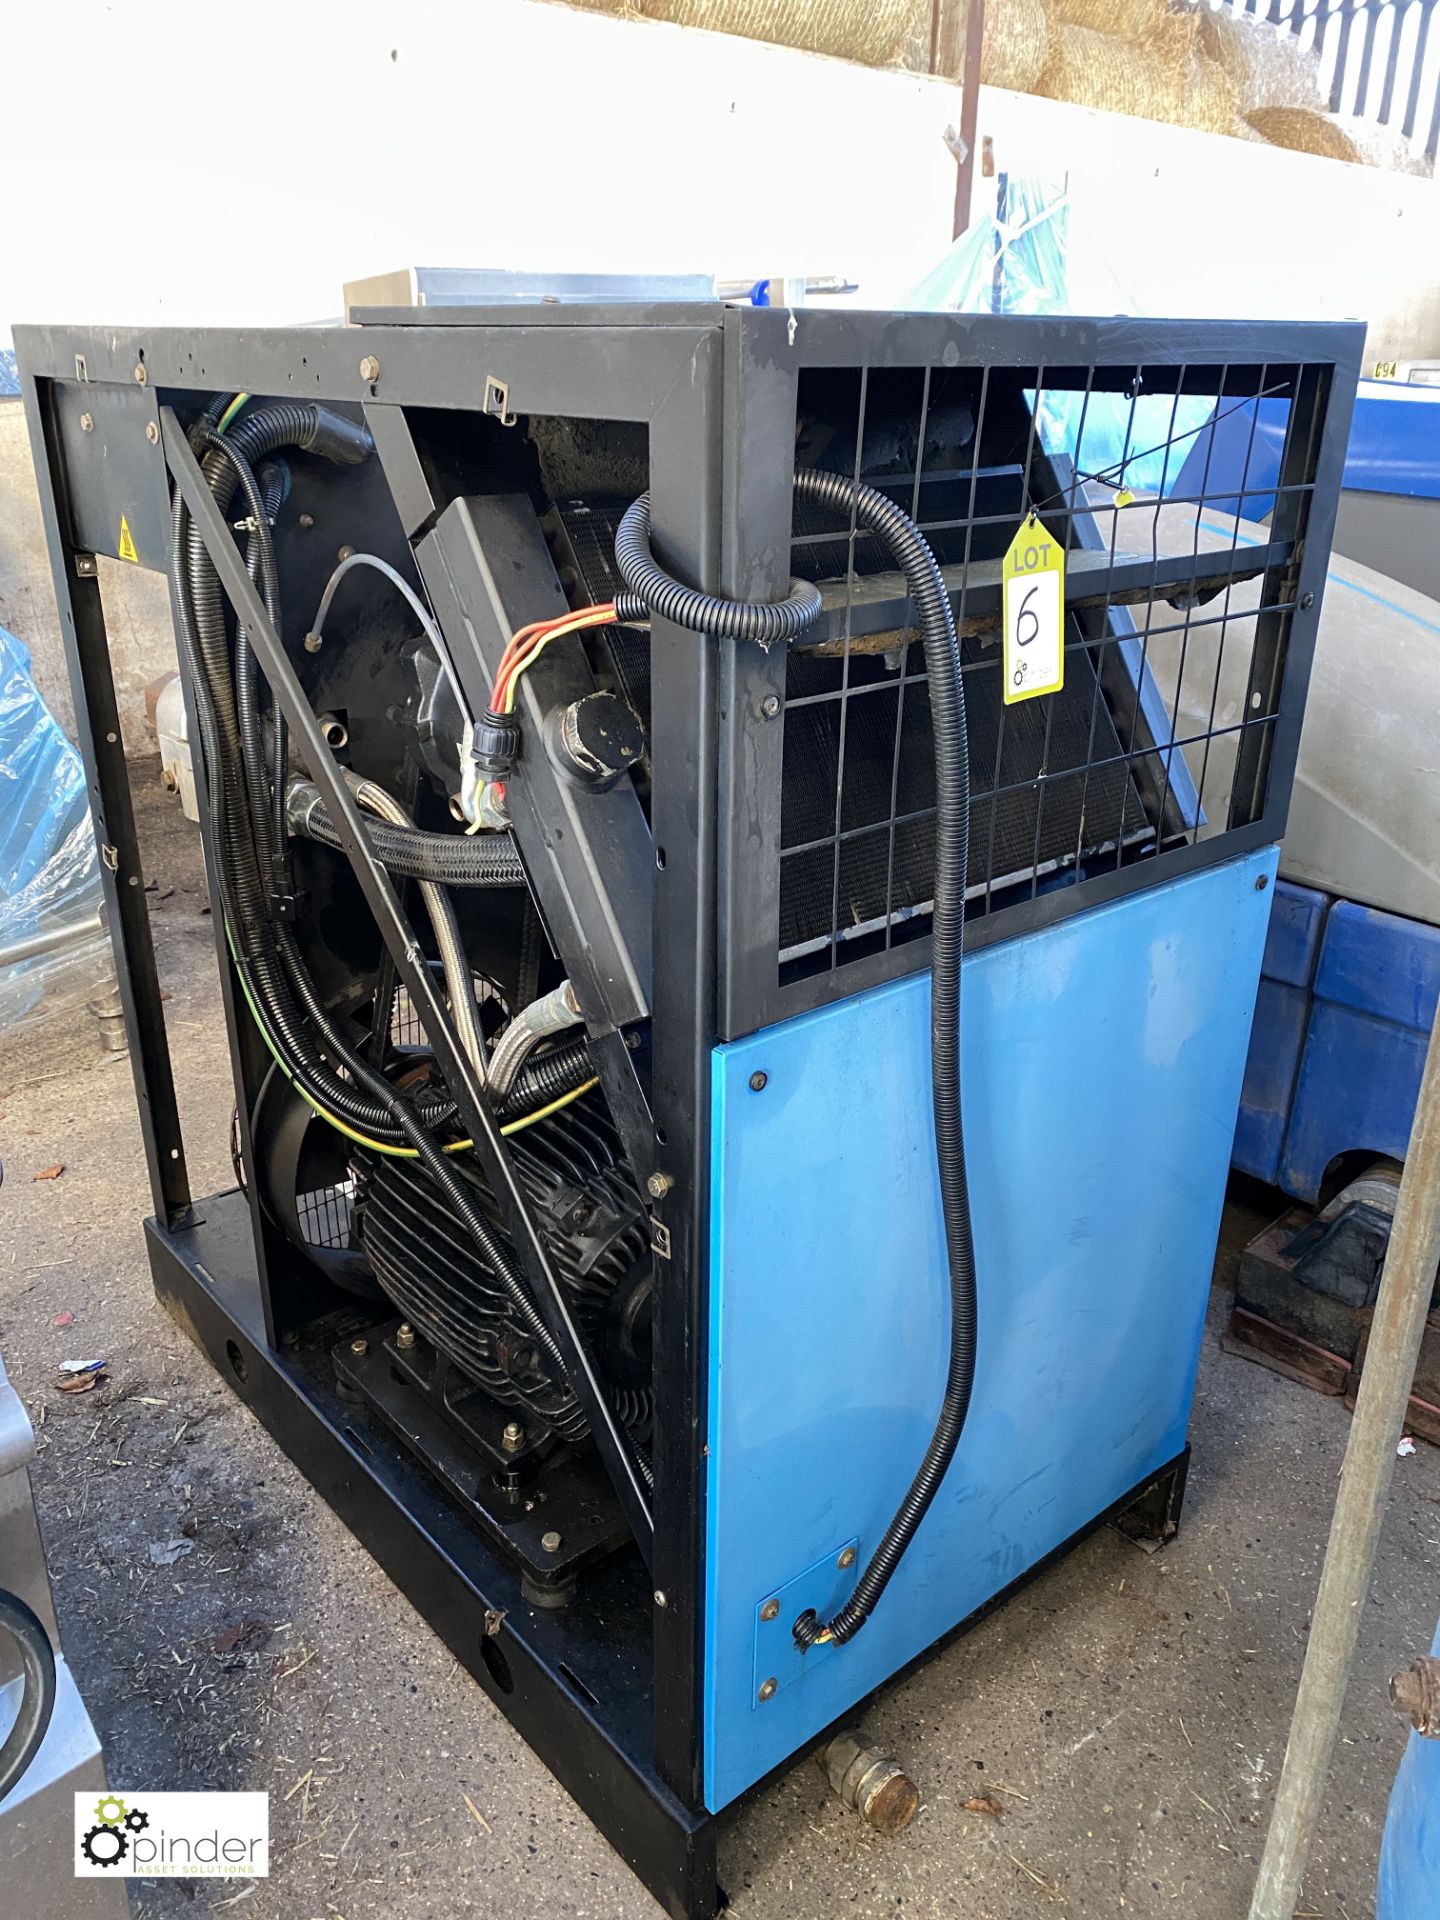 Compair Broomwade Air Compressor (spares or repairs) (please note this lot has a lift out fee of £10